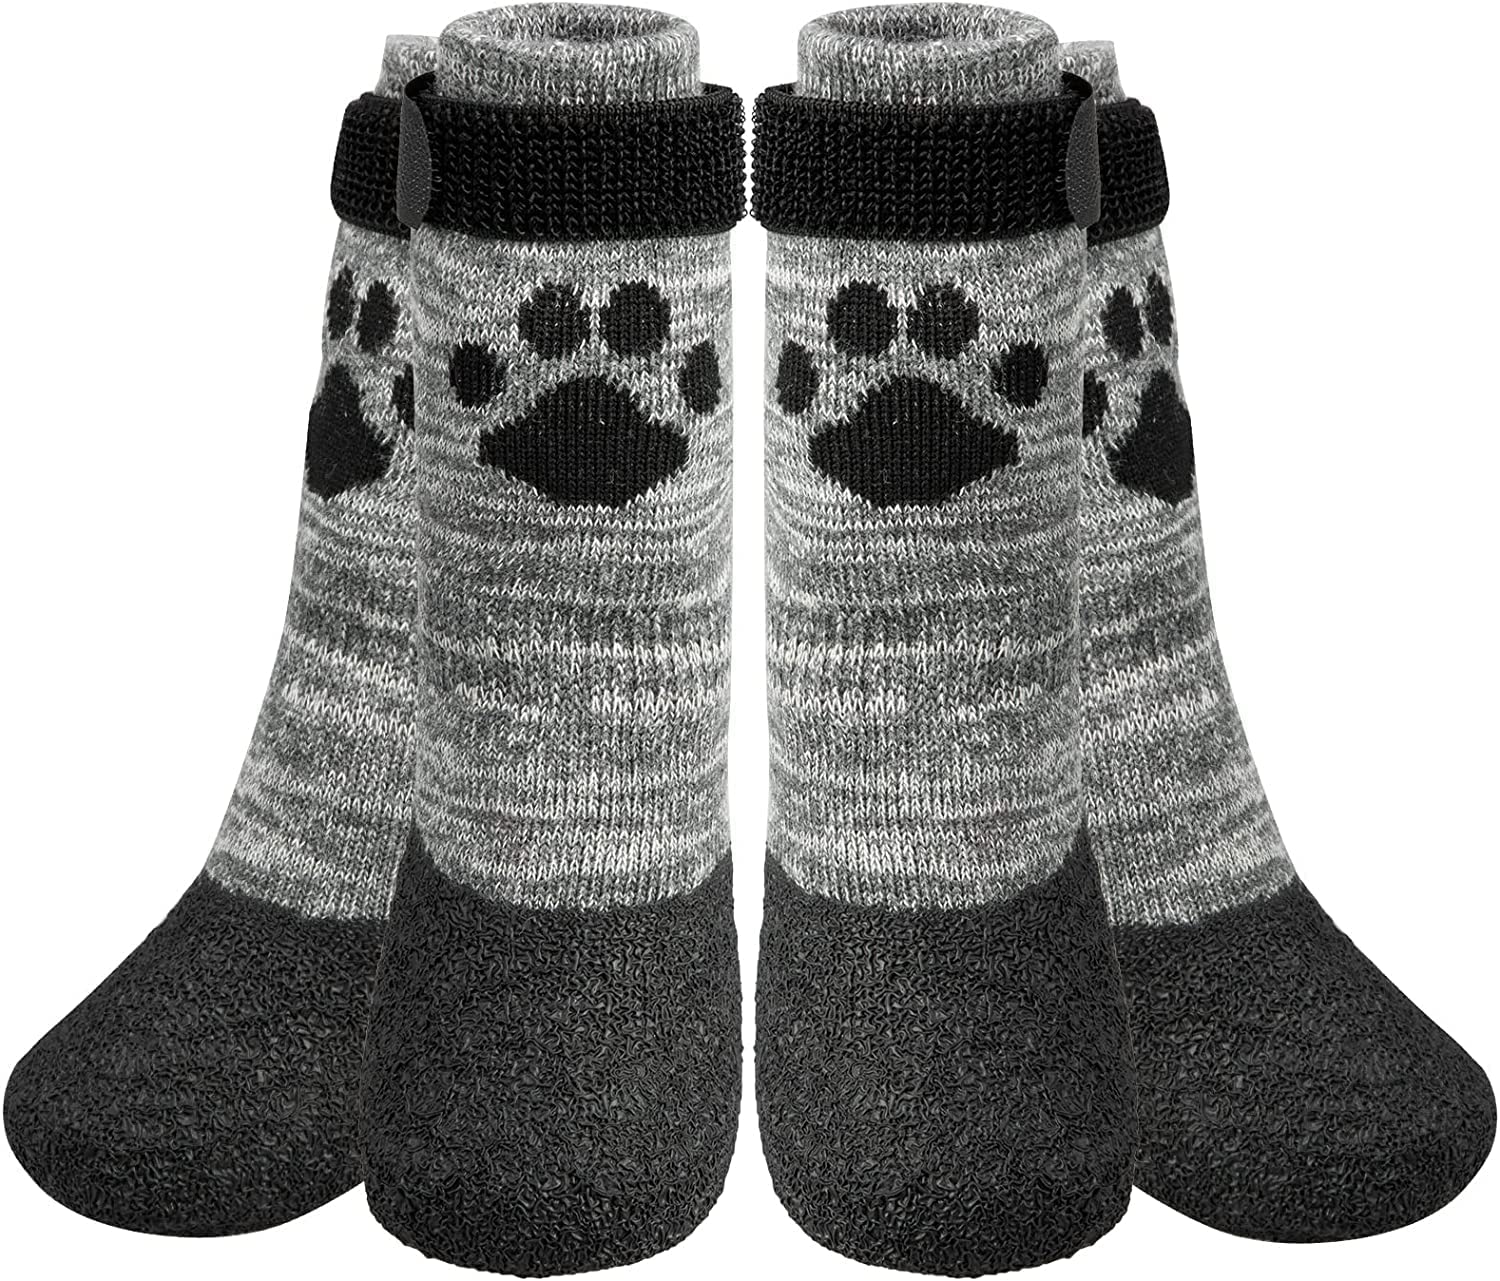 Dog Socks for Hardwood Floors to Prevent Licking,Dog Boots Paw Protector  with Non Anti Slip, Dog Grips for Large Senior Dogs,Pack of 4 